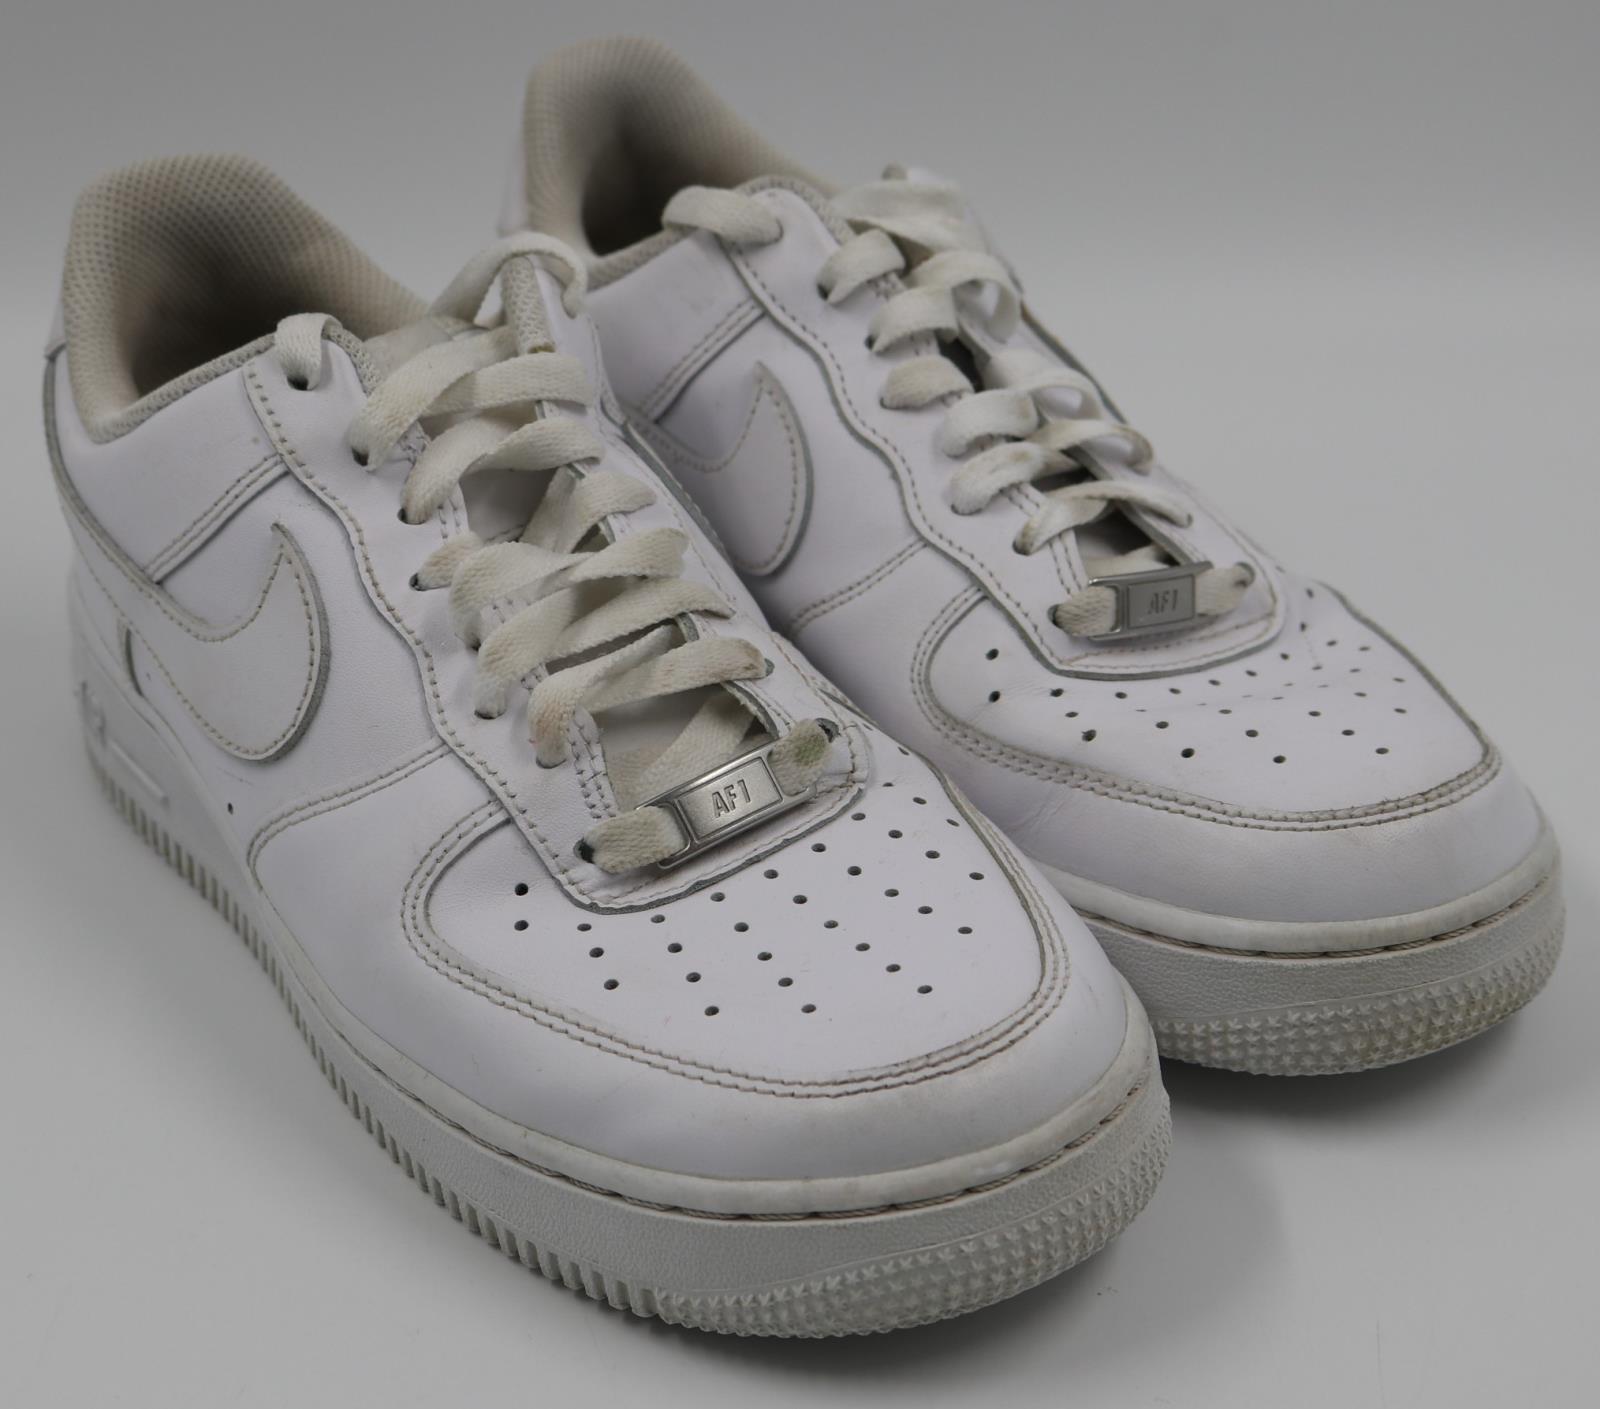 Nike Air Force 1 Womens Casual Athletic White Sneakers Shoes Size 9